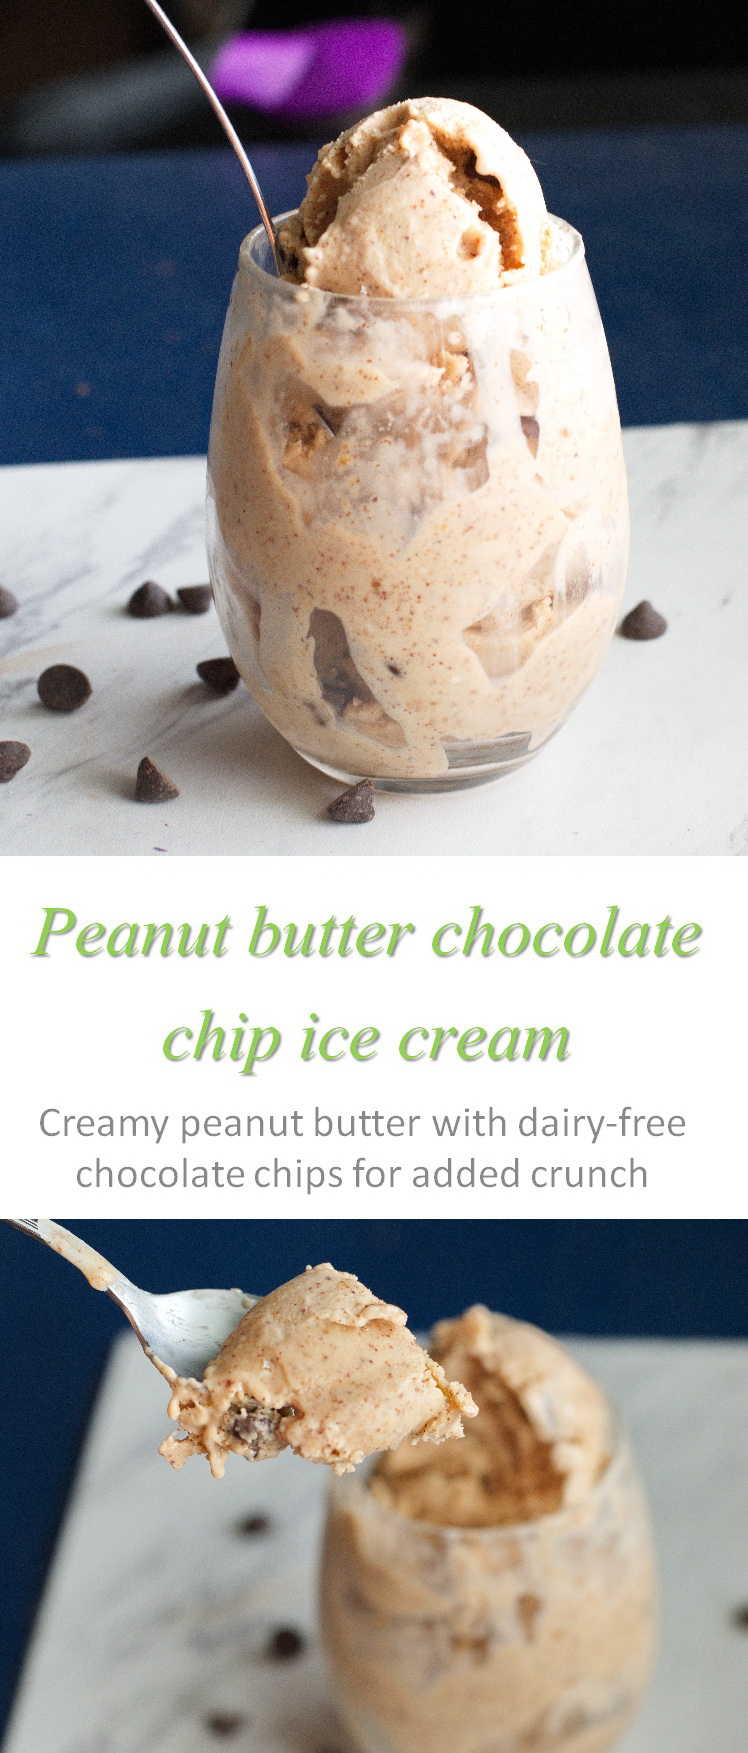 This peanut butter chocolate chip ice cream combines the yummy flavors of peanut butter and chocolate in a dairy-free frozen delight! #peanutbutter #icecream #cookathome #glutenfree #dairyfree #vegan